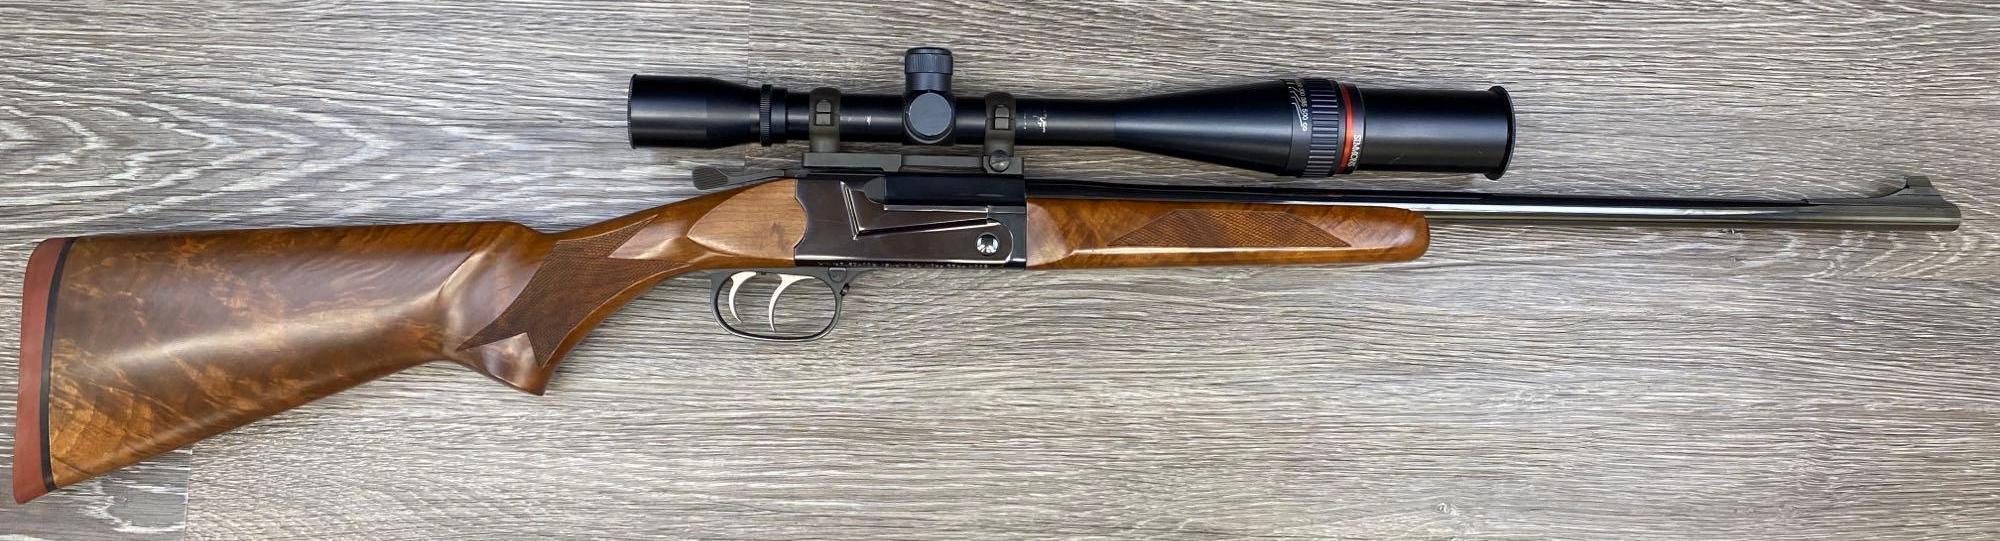 THOMPSON CENTER TCR-87 HUNTER DELUXE .223 REM. TOP-BREAK SINGLE-SHOT RIFLE WITH SCOPE